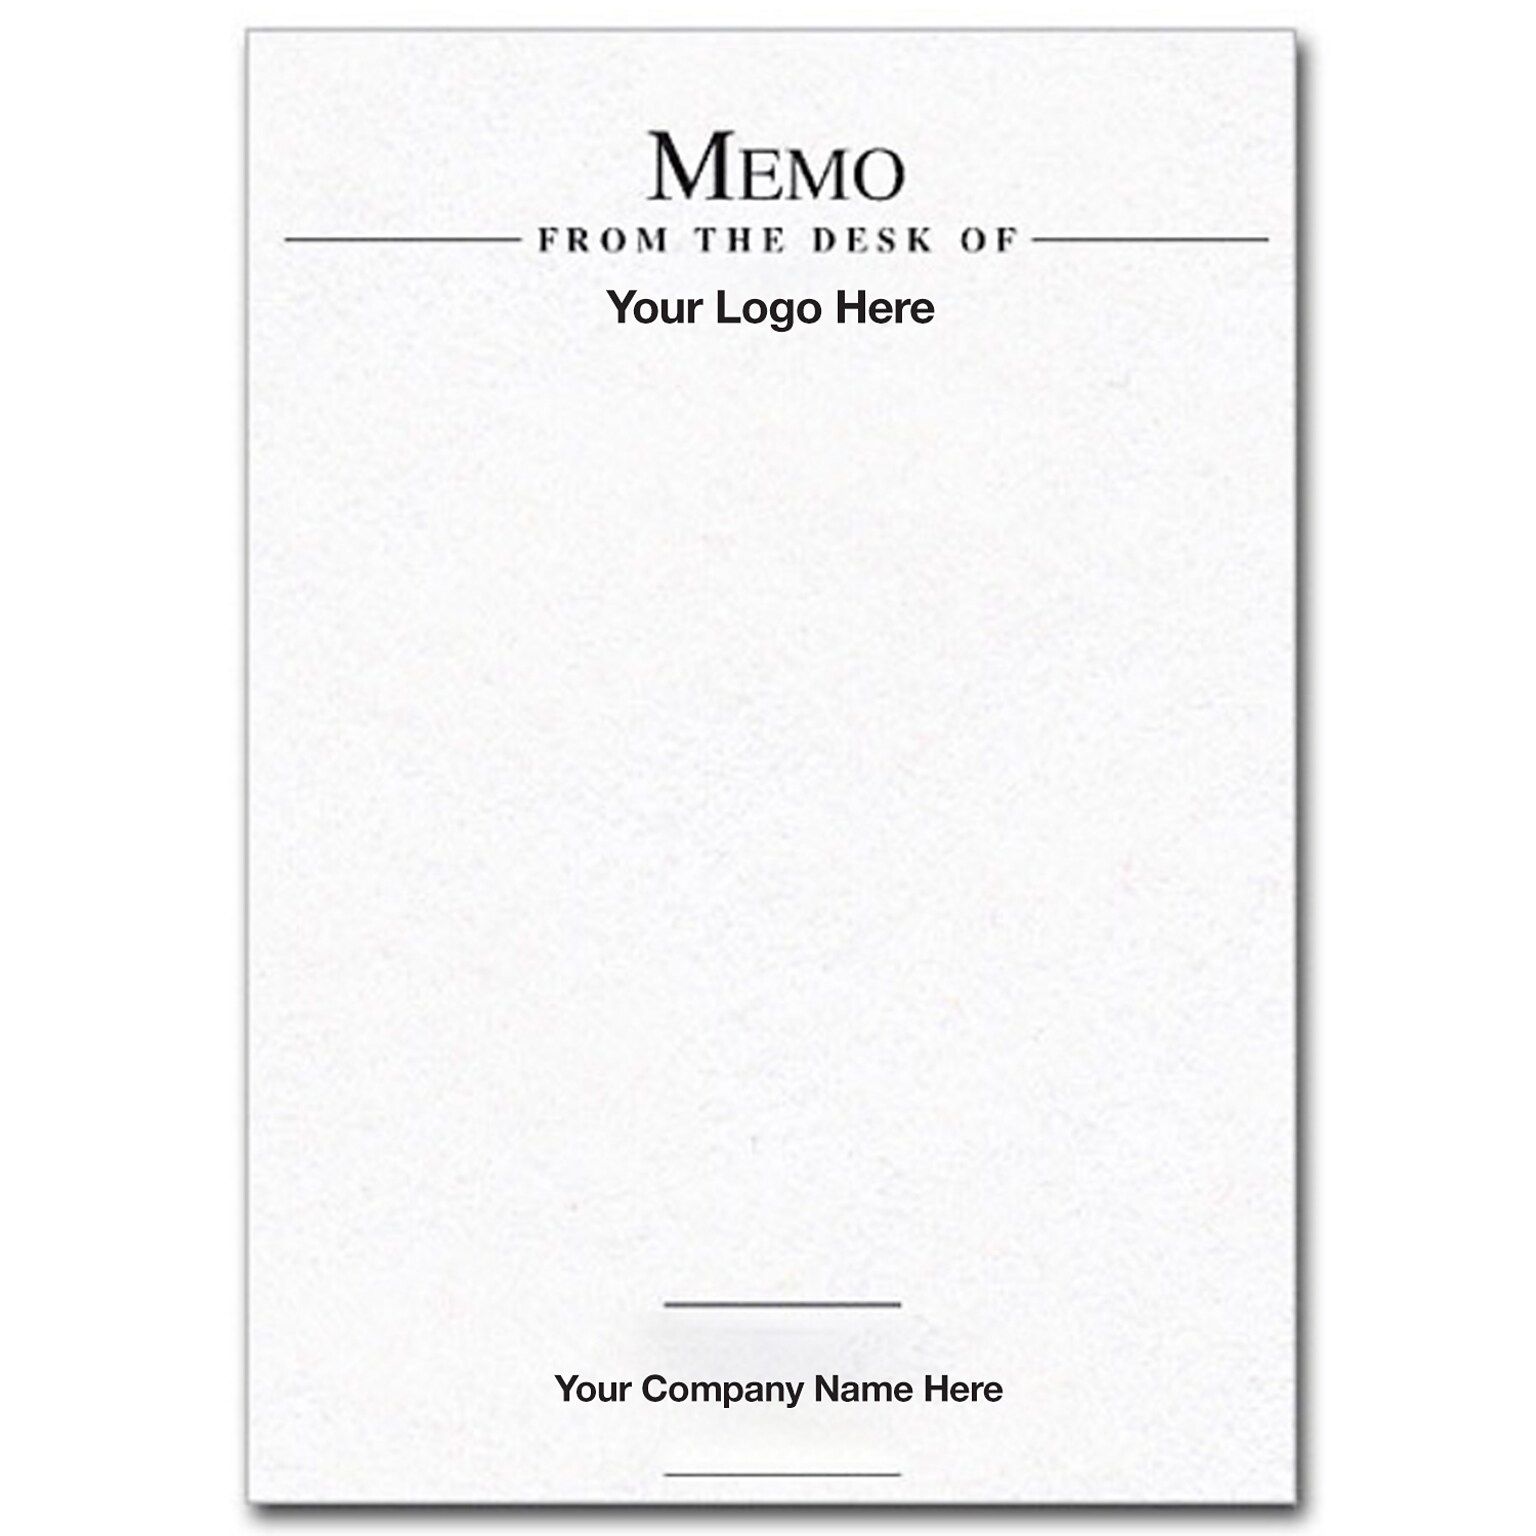 Custom Memo Pads, White Smooth 24# Text Stock, 4 x 5.5, 1 Standard Ink, Flat Ink, 2-Sided, 100 Sheets per Pad